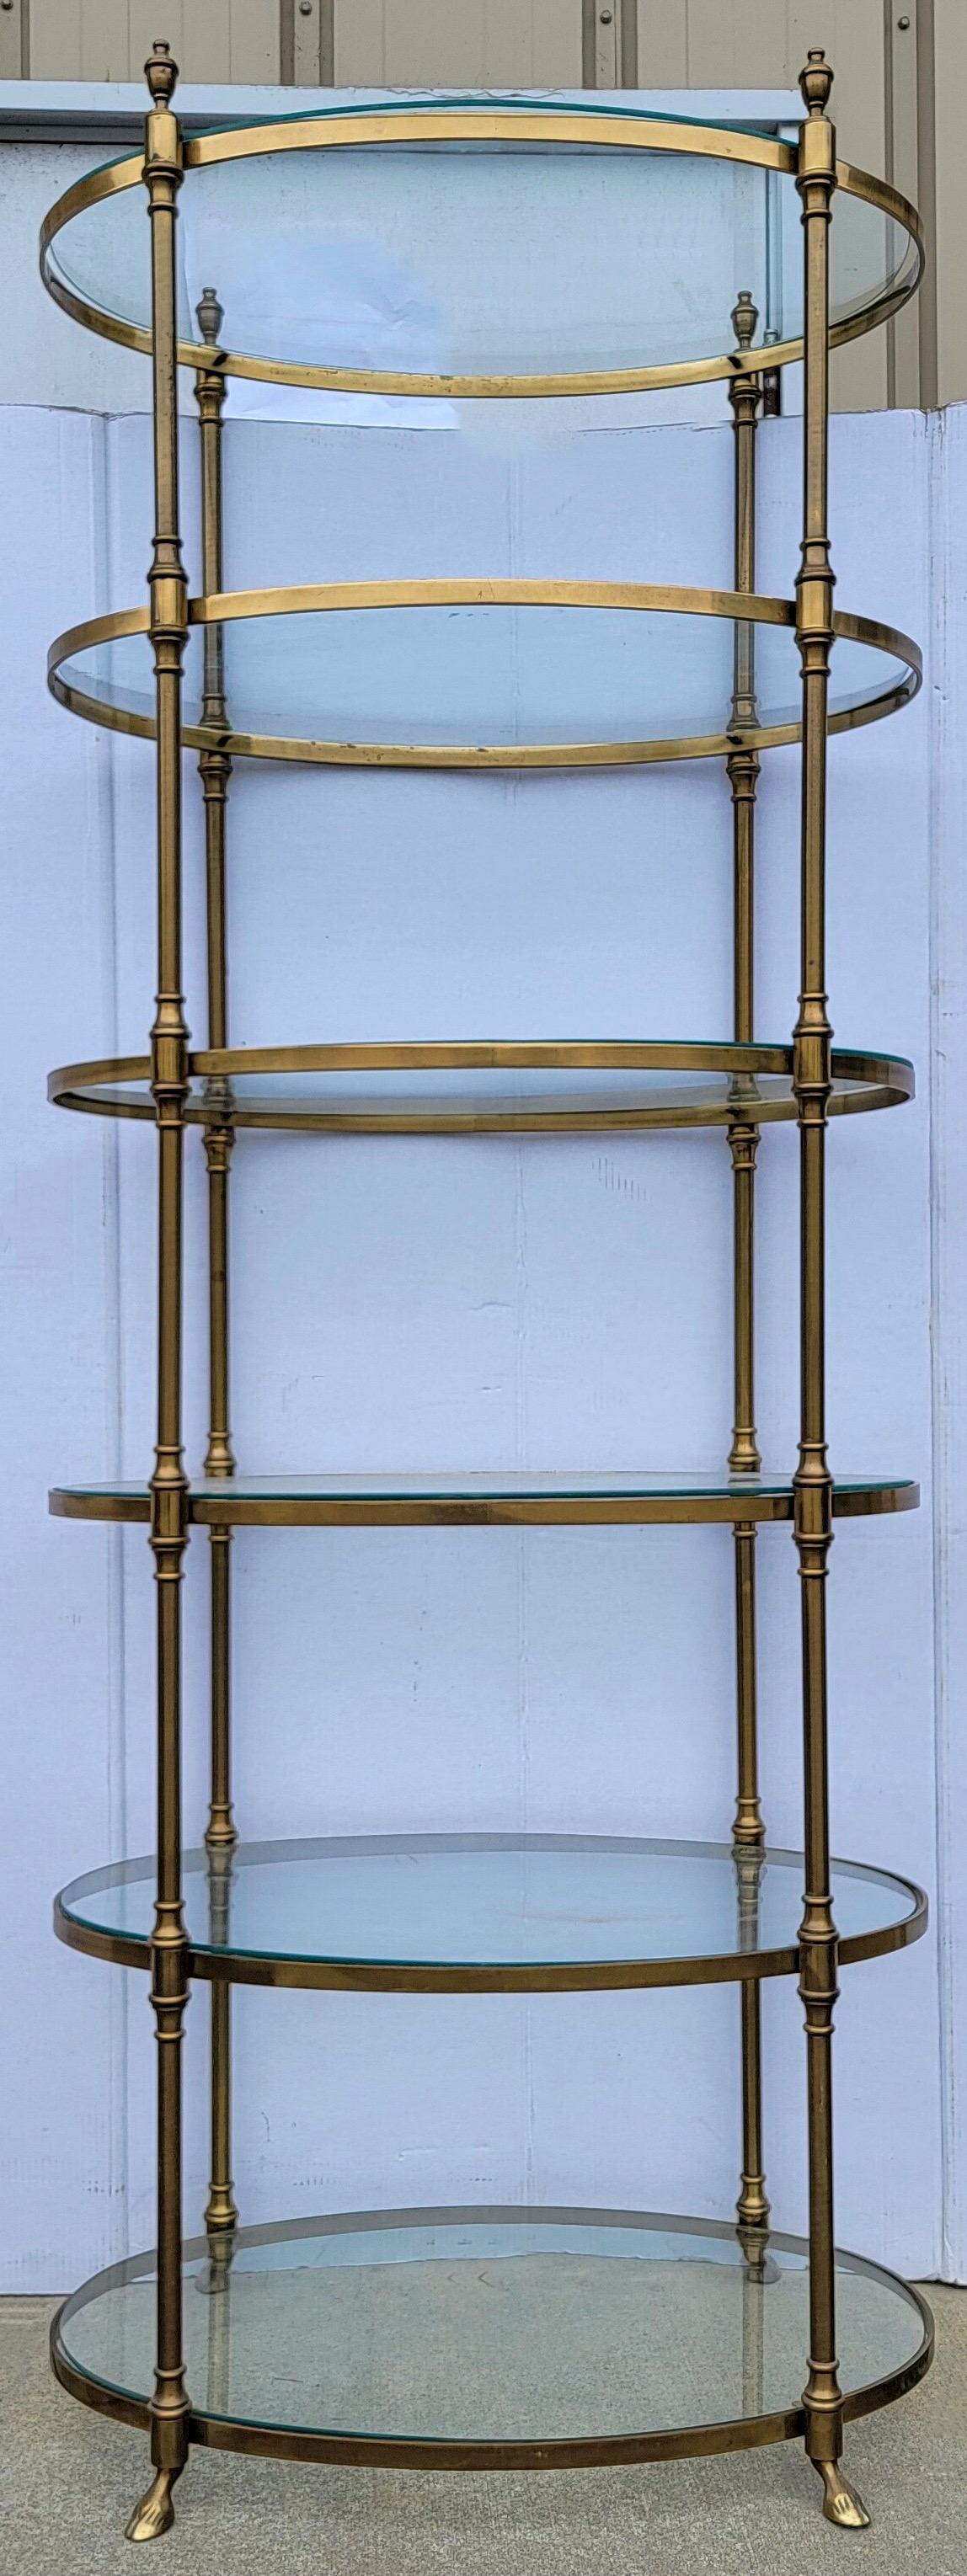 Neoclassical 1970s Tall Neo-Classical Maison Jensen Style Brass and Glass Etagere / Shelf